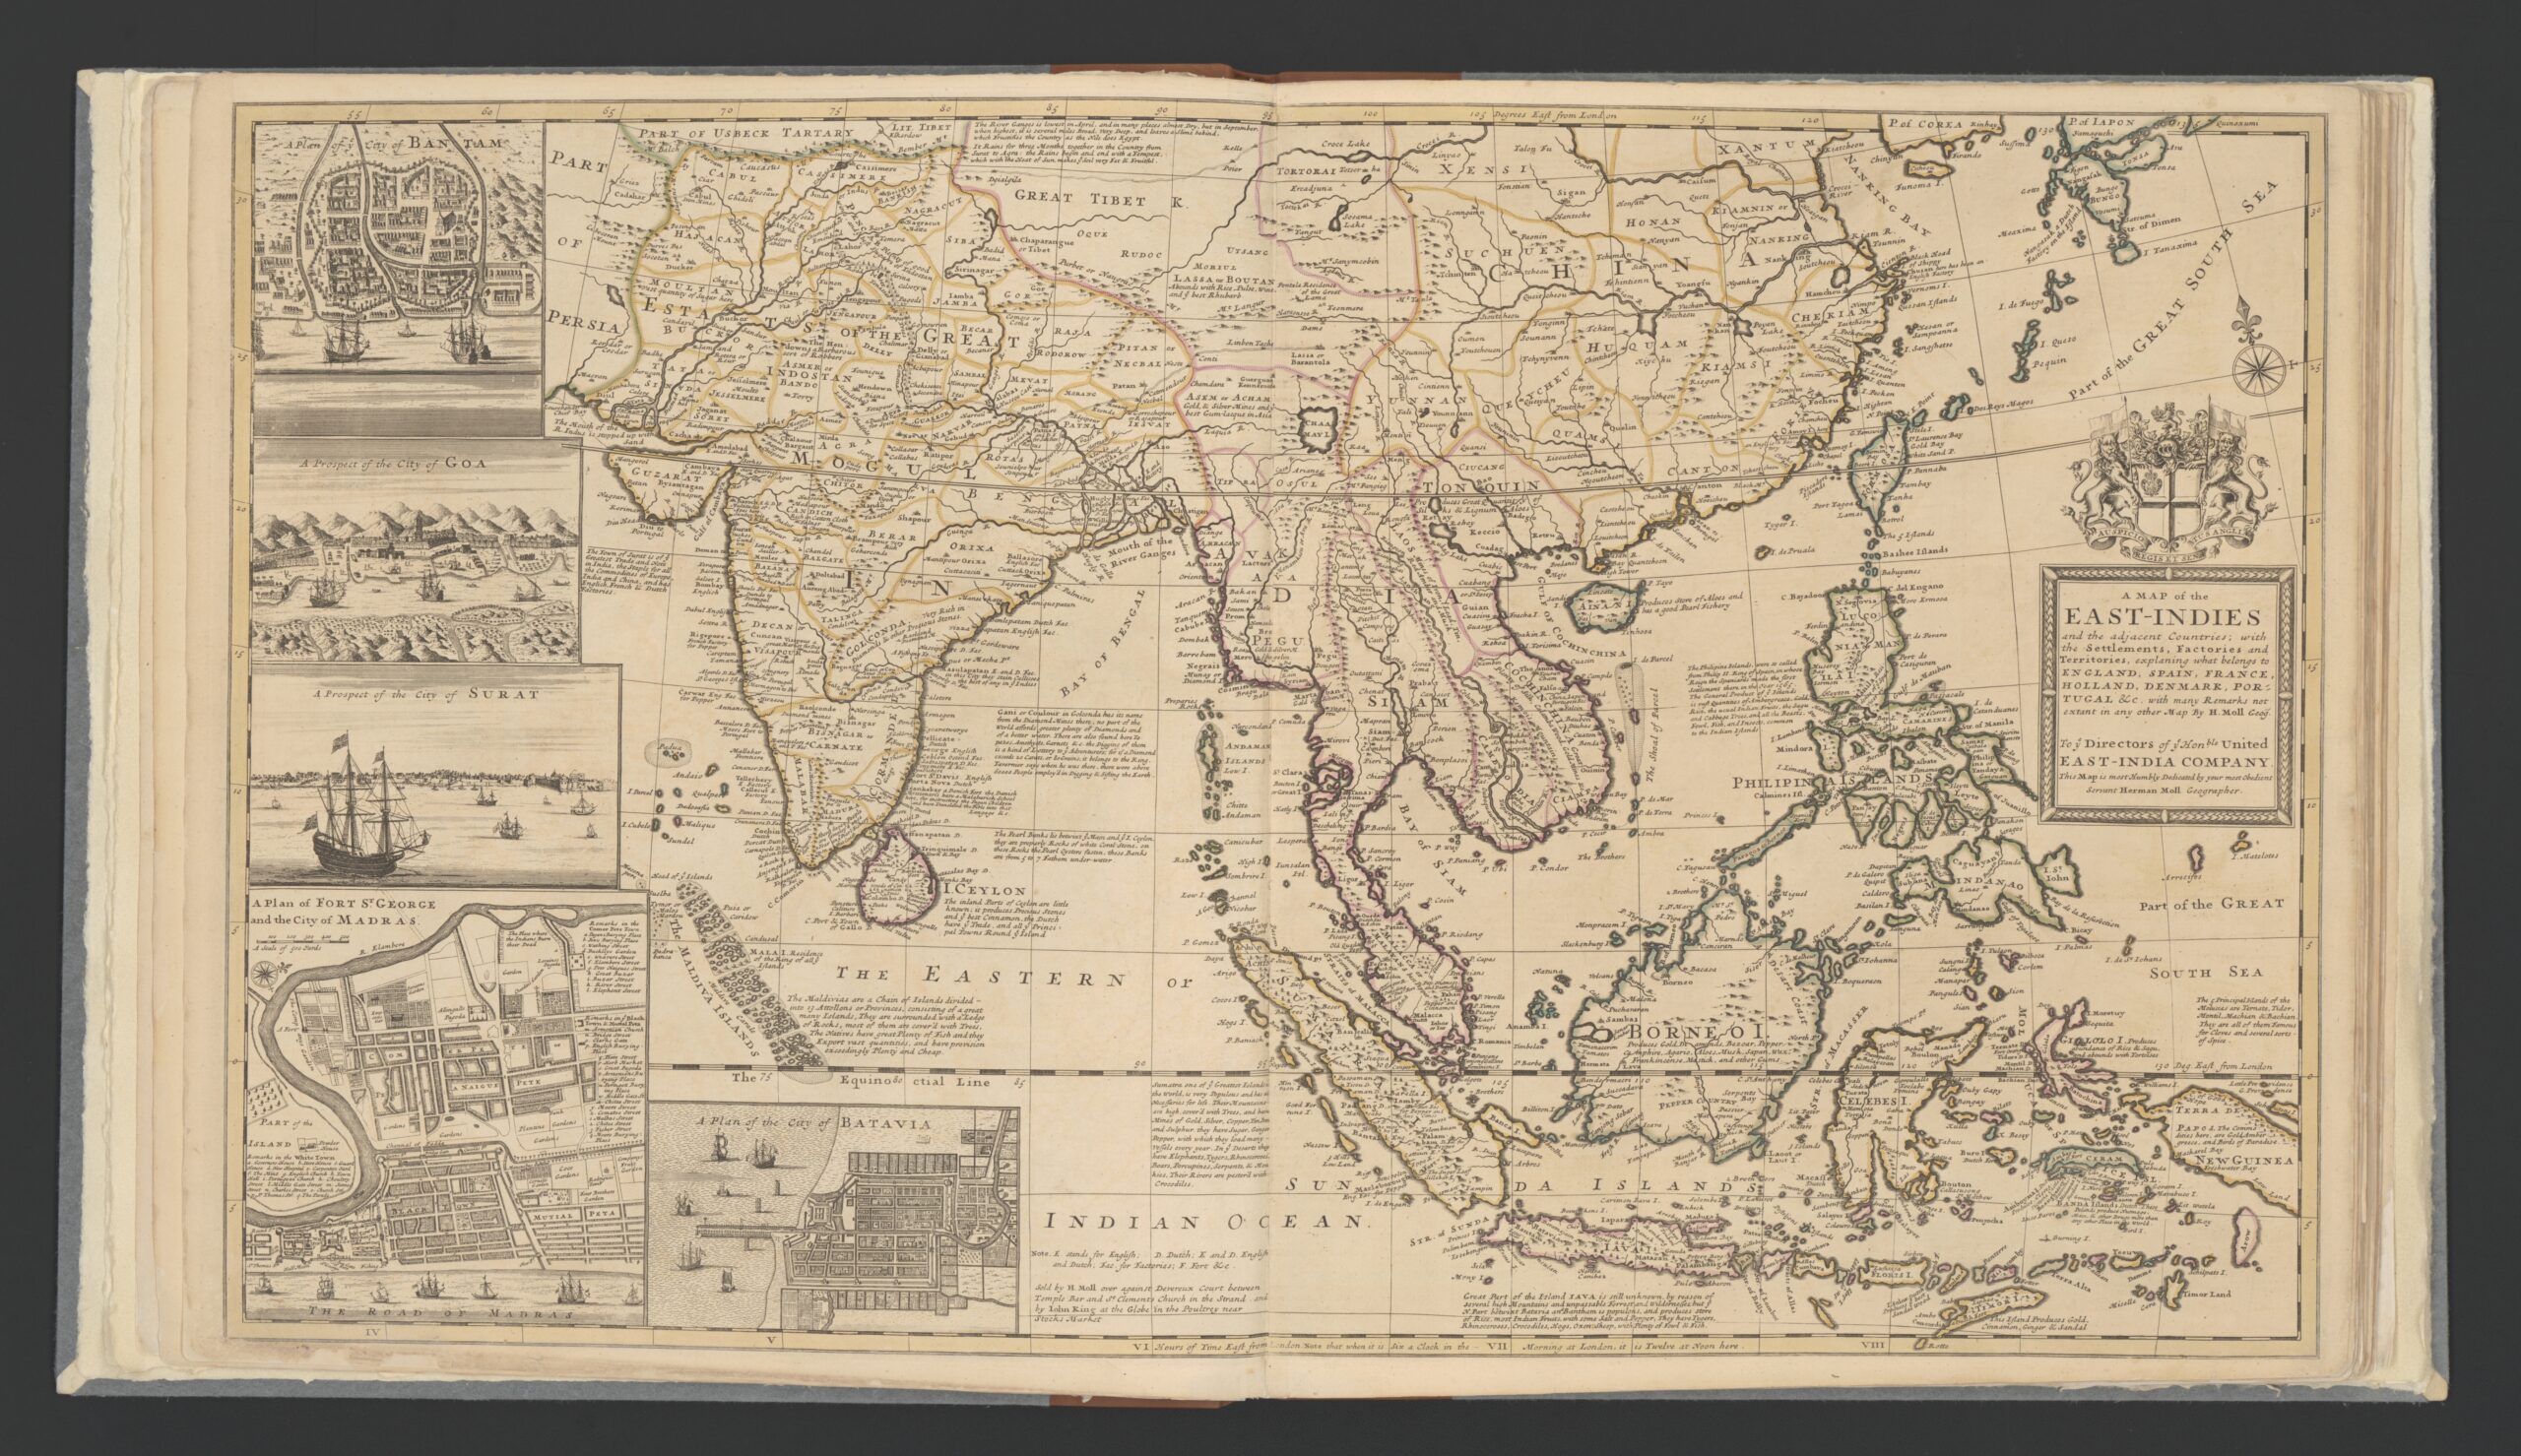 Trader Flows: Early 18th Century East Indies Trade